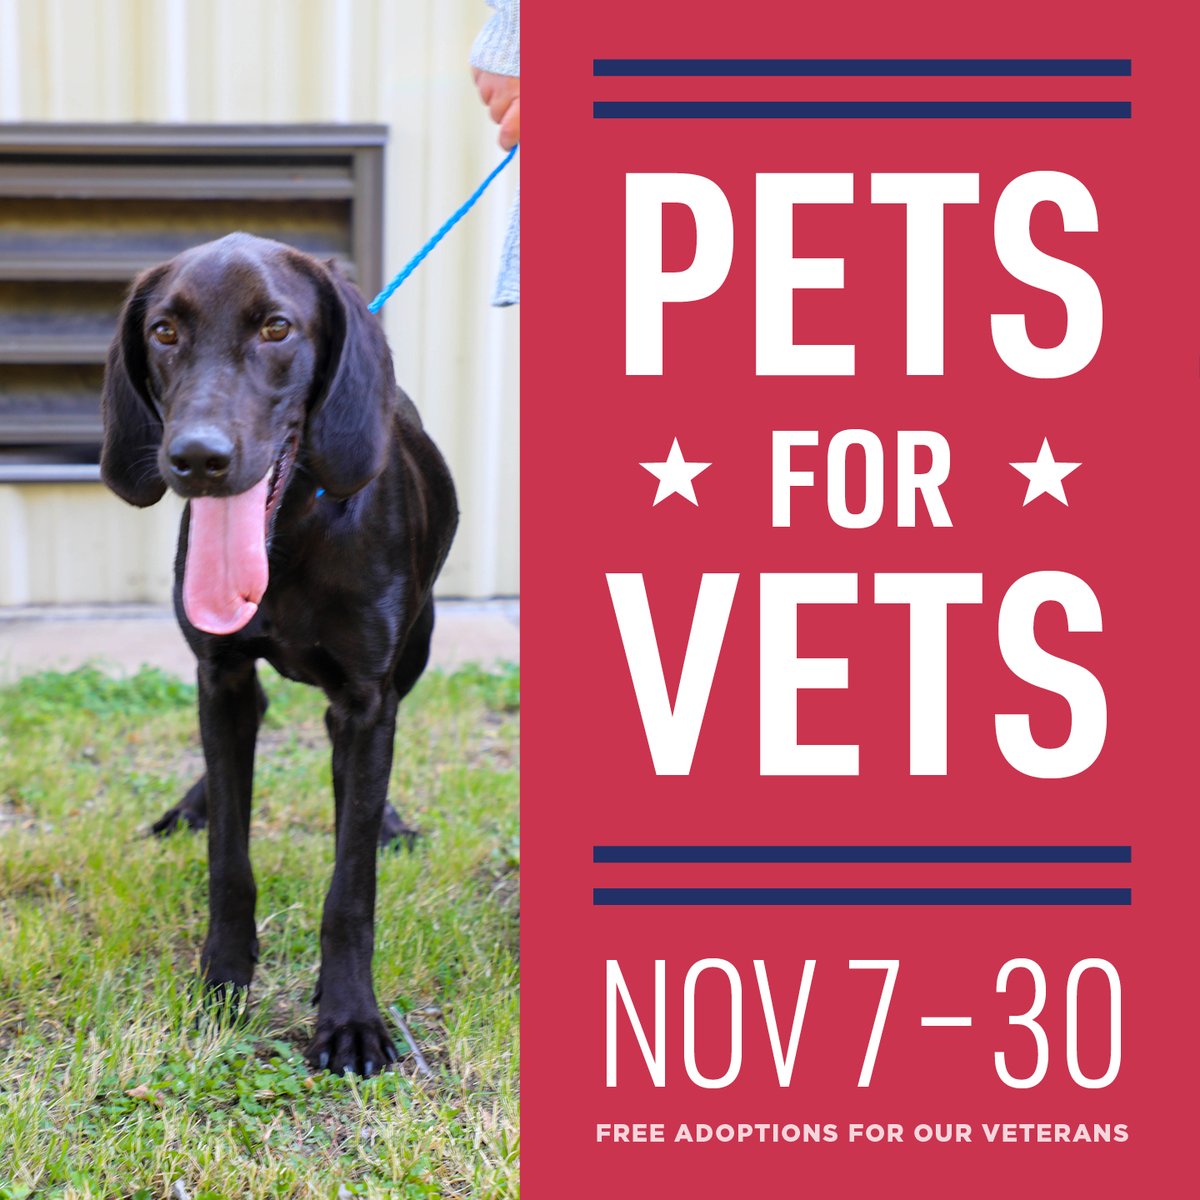 Temple Police Dept on Twitter "PETS FOR VETS Starting today, all